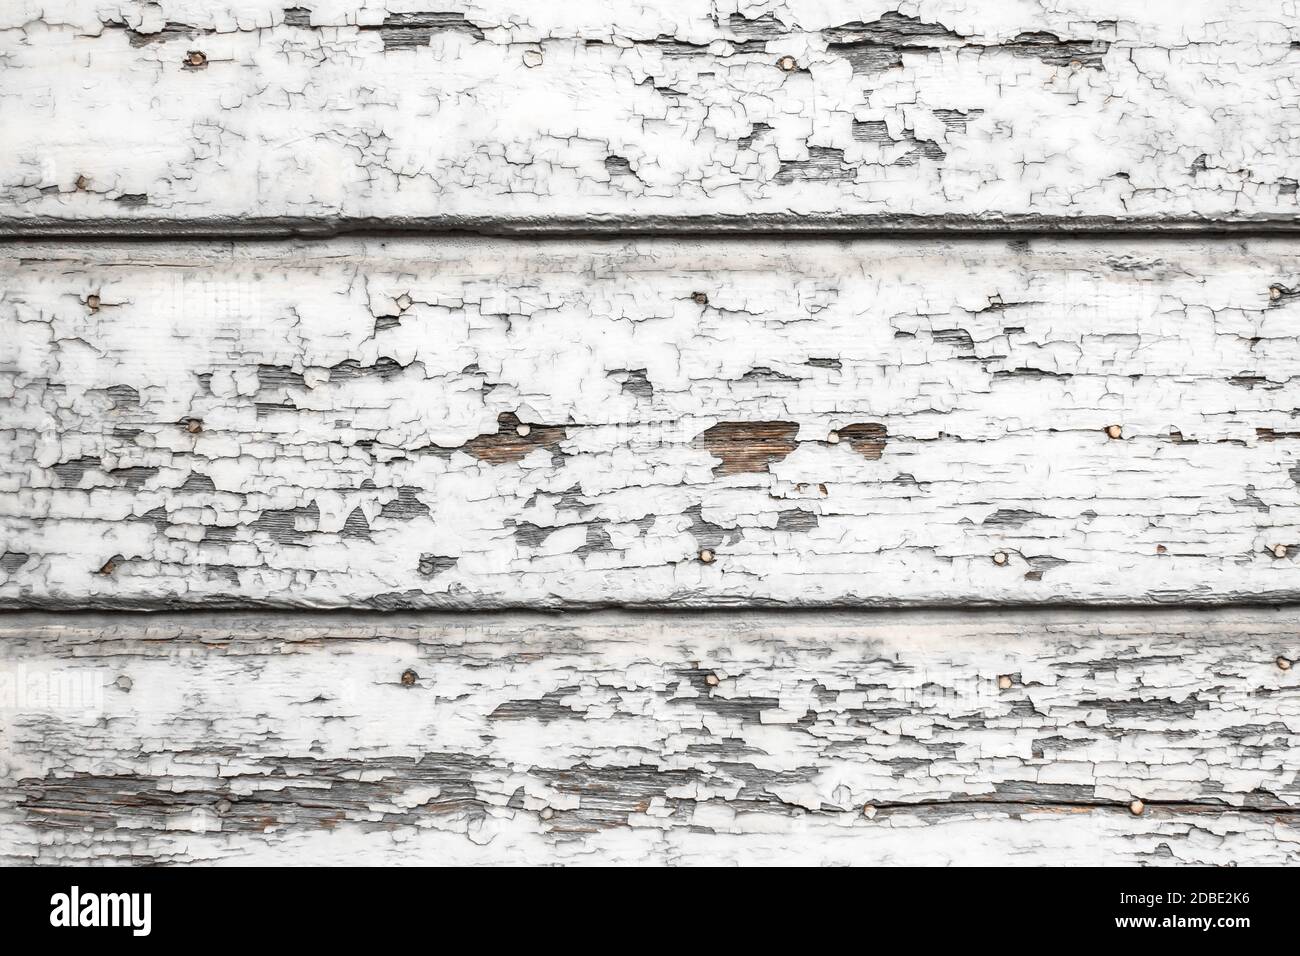 Old wooden painted white rustic fence, paint peeling background. Stock Photo